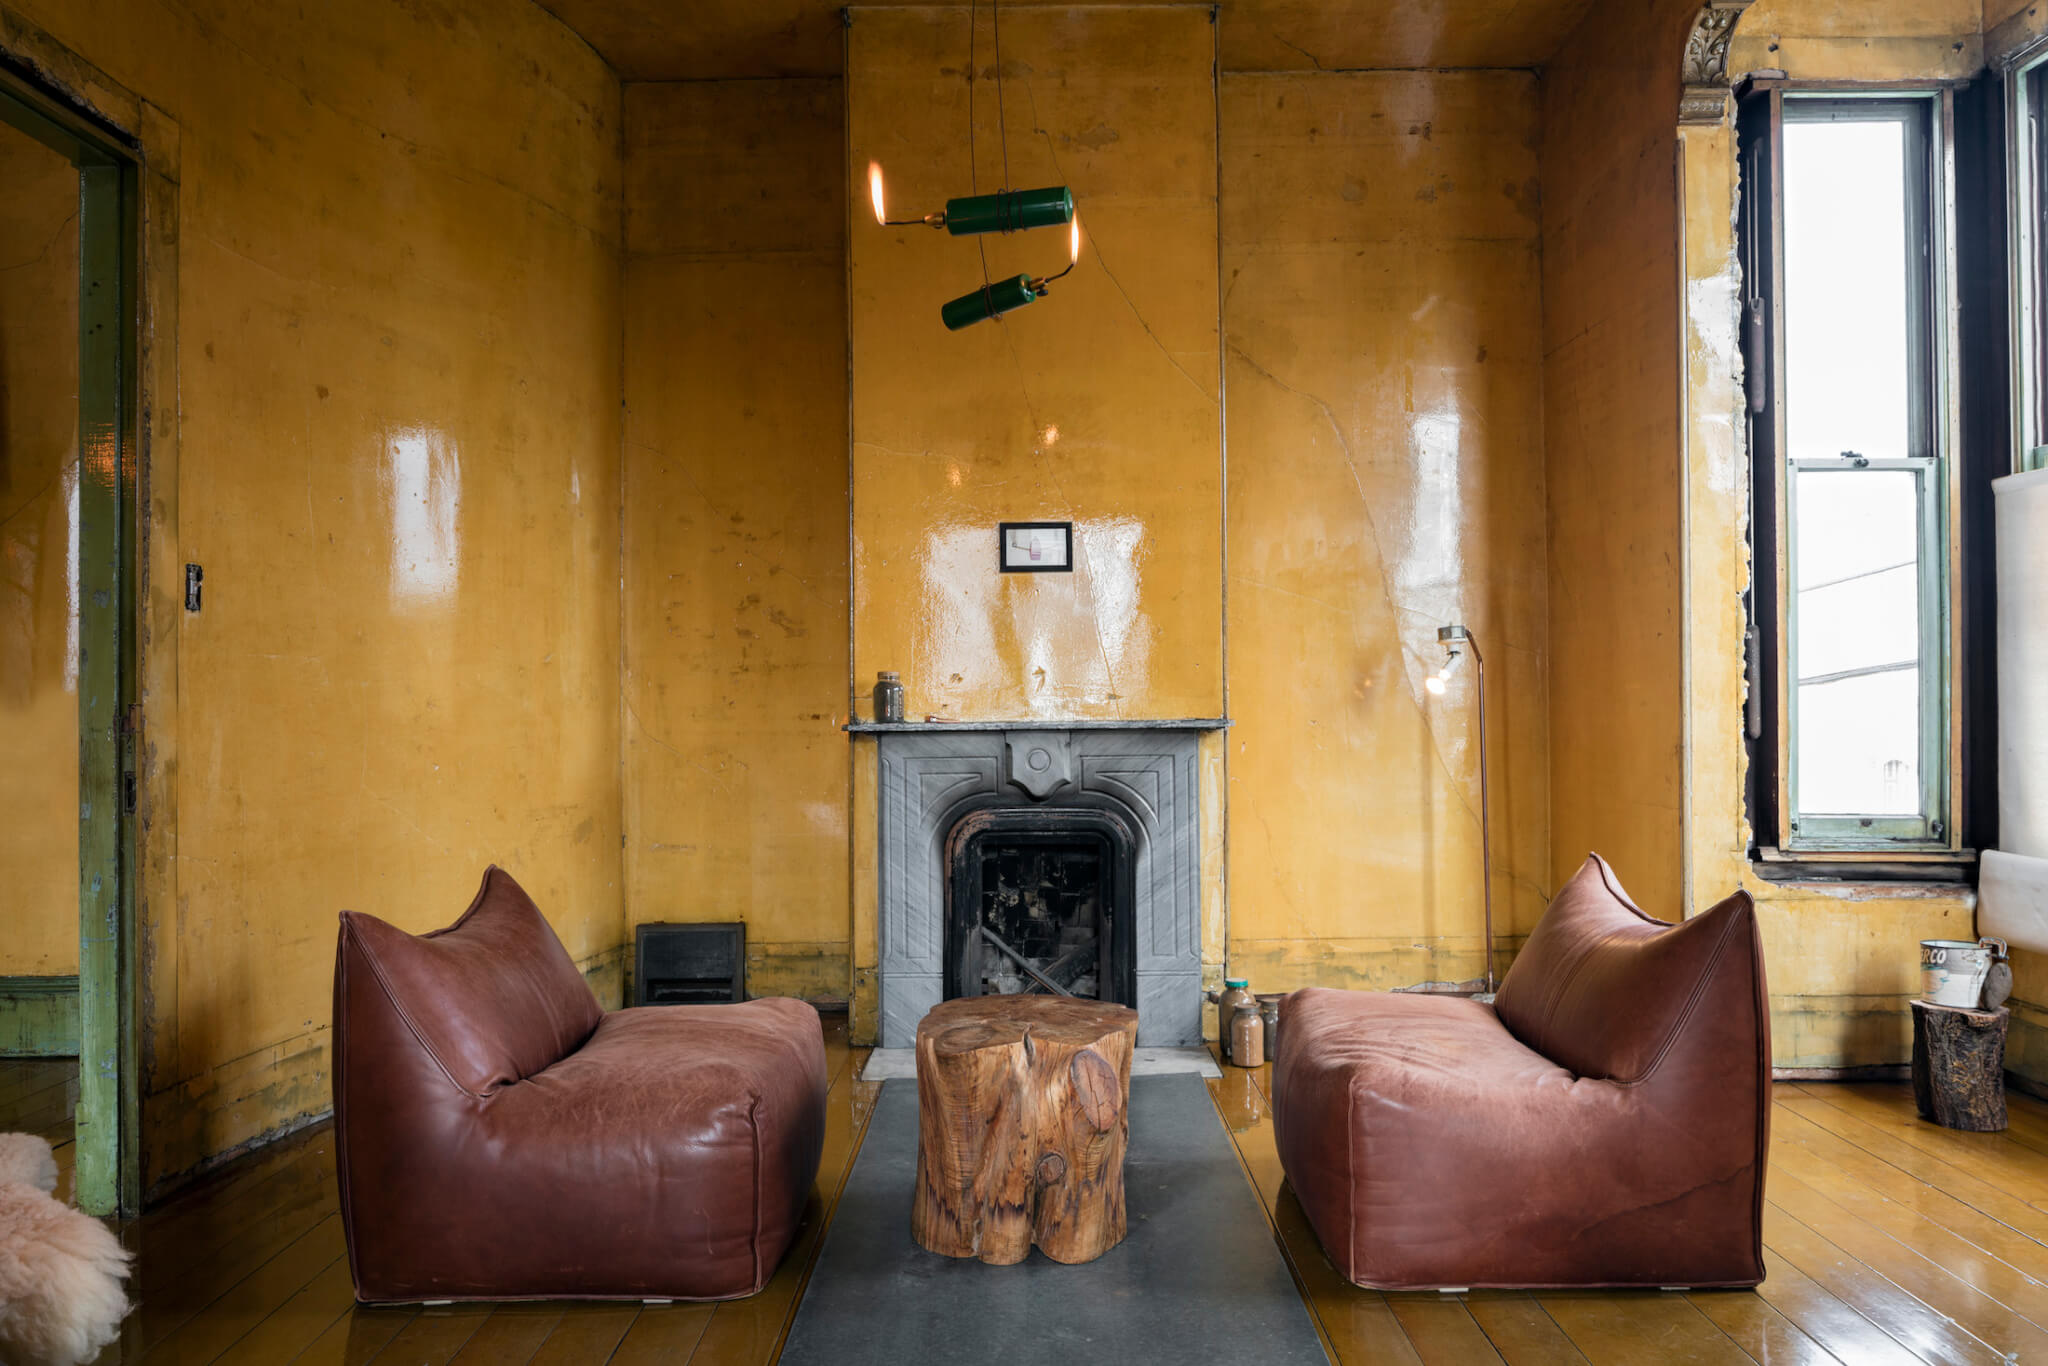 a seating area next to a large hearth